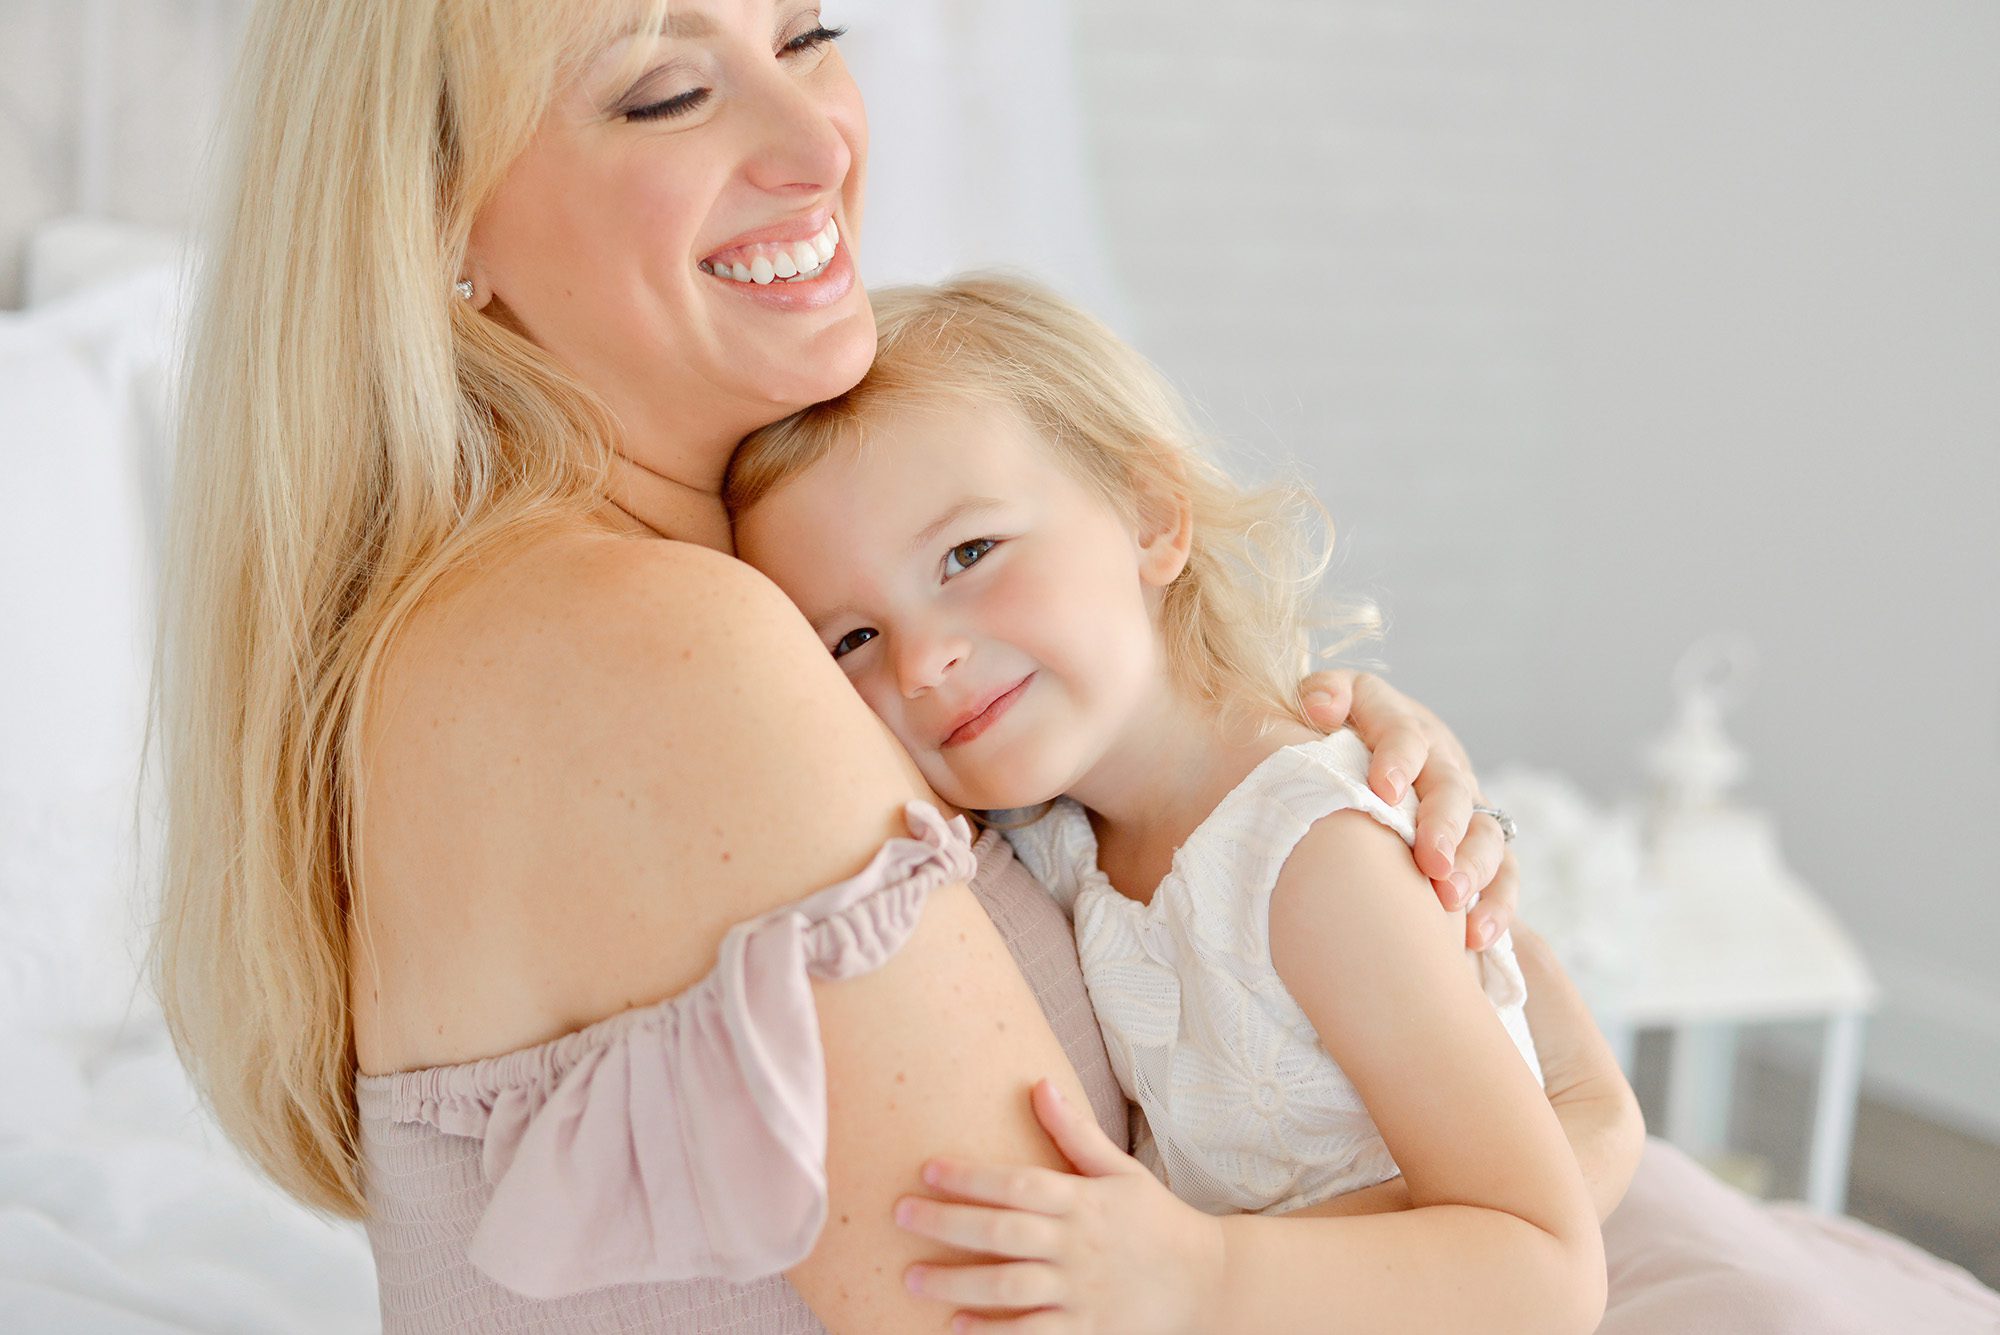 Mom and daughter happily snuggling and giggling on a white bed in a studio for a portrait session